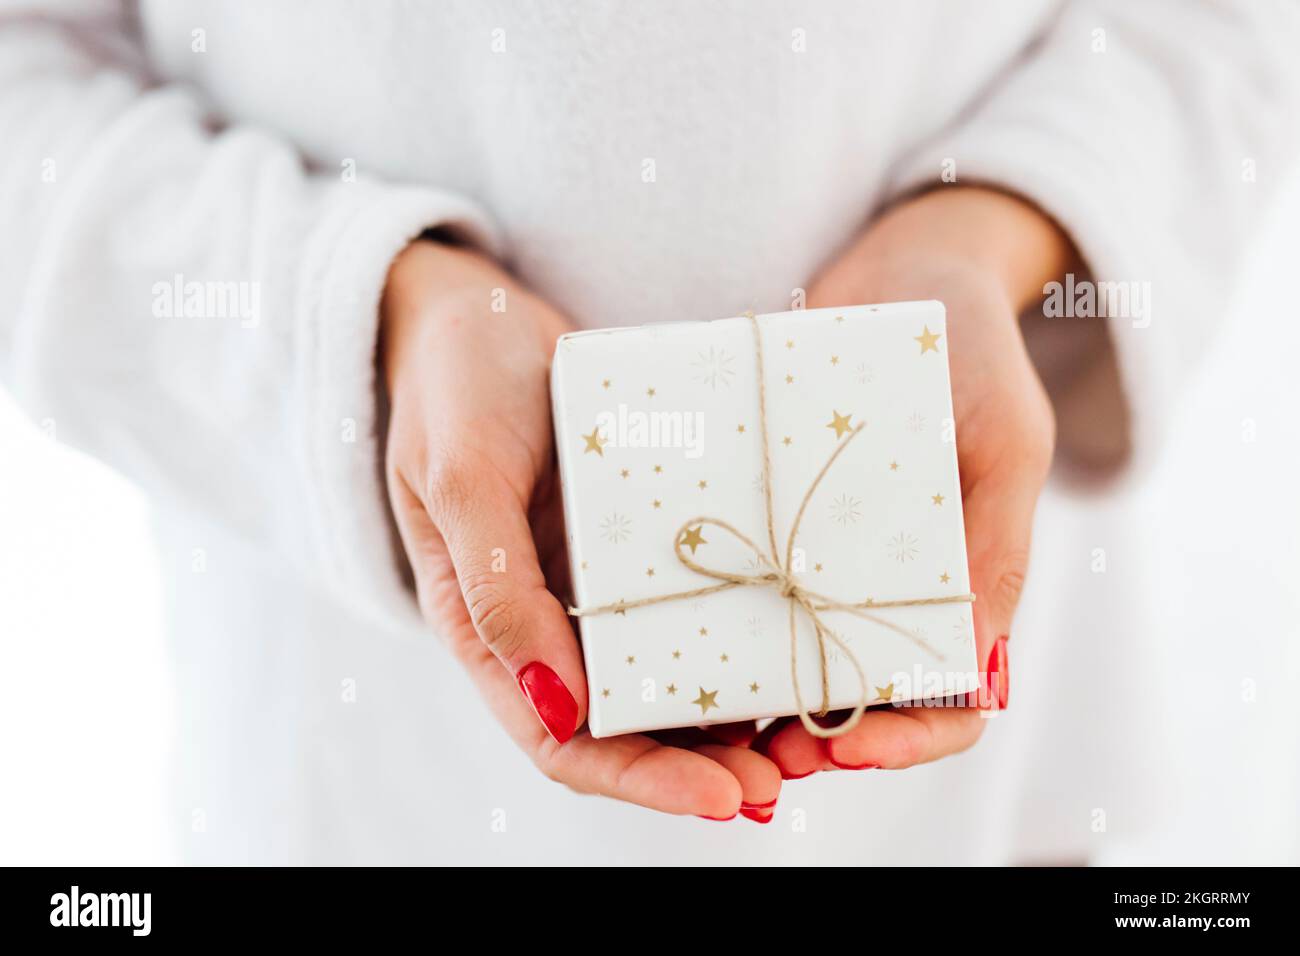 Hands of woman holding Christmas gift Stock Photo